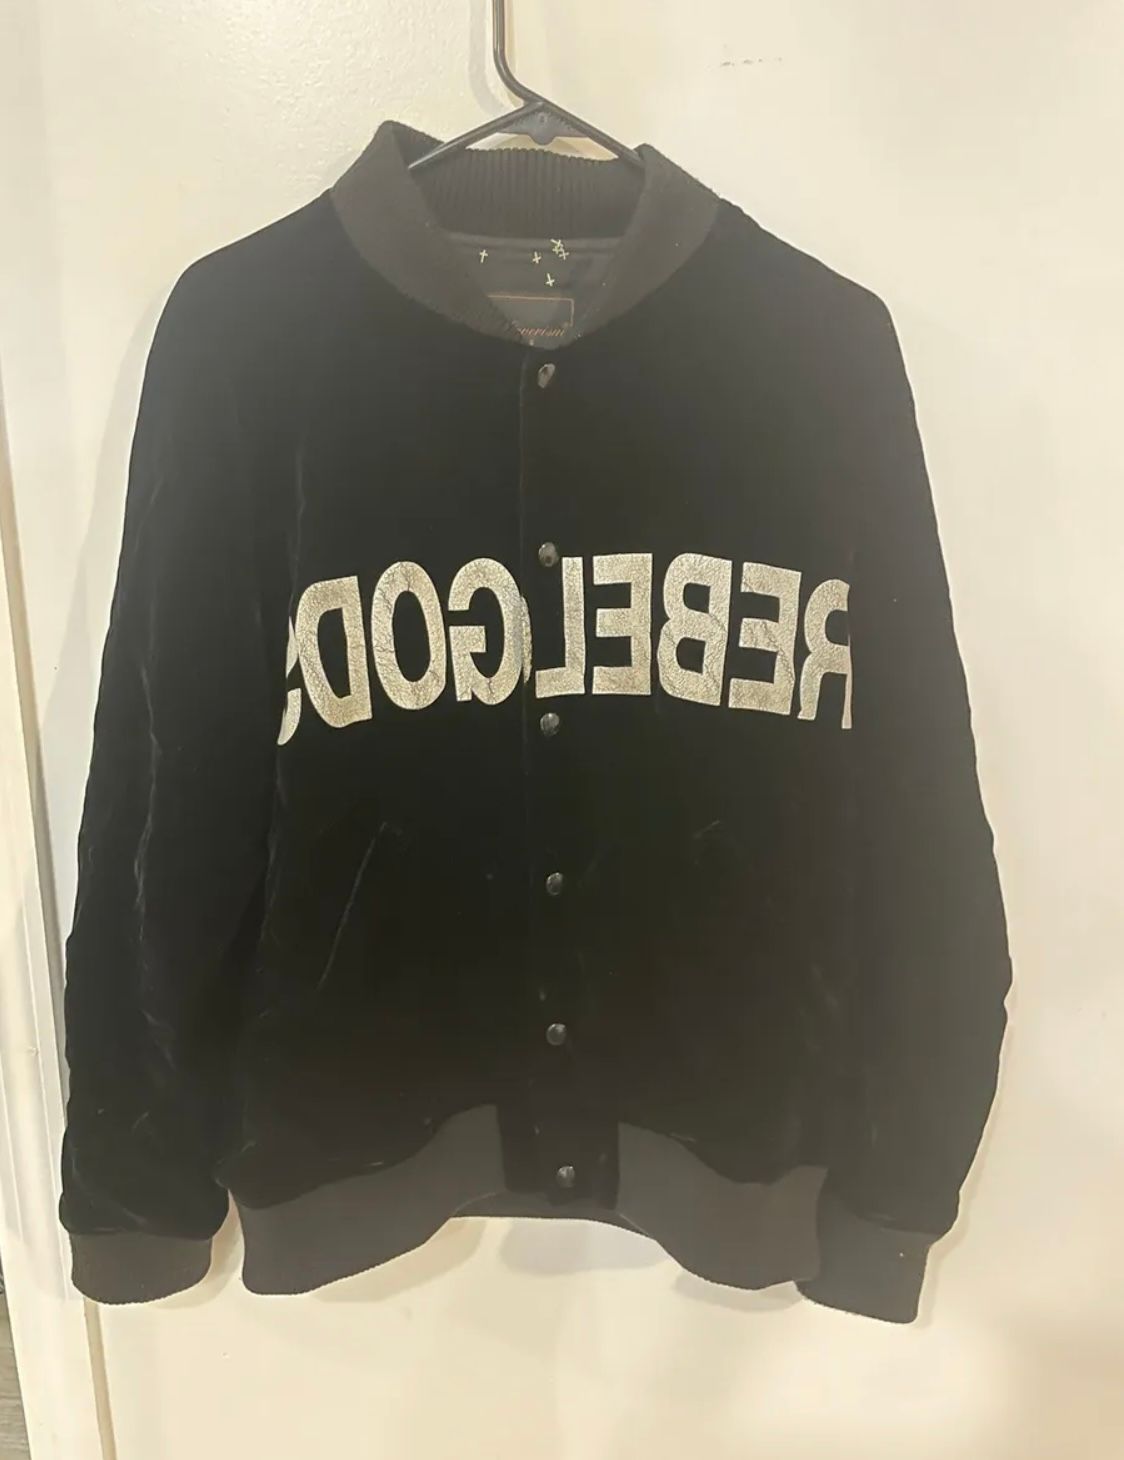 Undercover undercover rebelgods jacket Size US M / EU 48-50 / 2 - 2 Preview